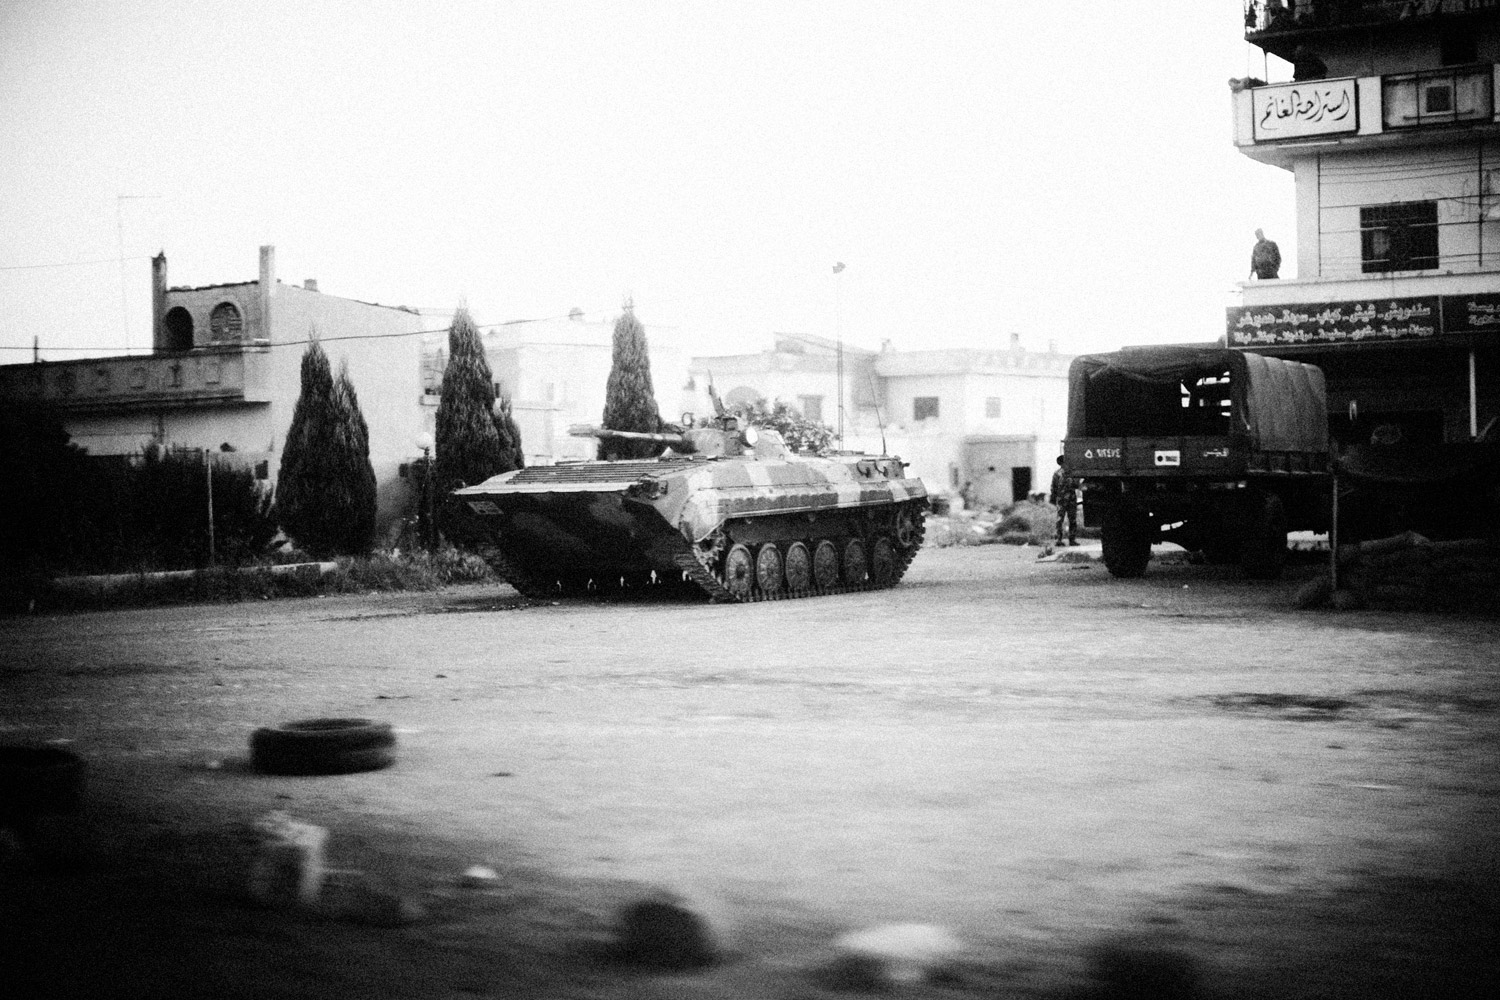 A Syrian Army tank positioned on the outskirts of Homs, July 16, 2011, the site of deadly clashes between young anti-regime protestors and Syrian security forces.